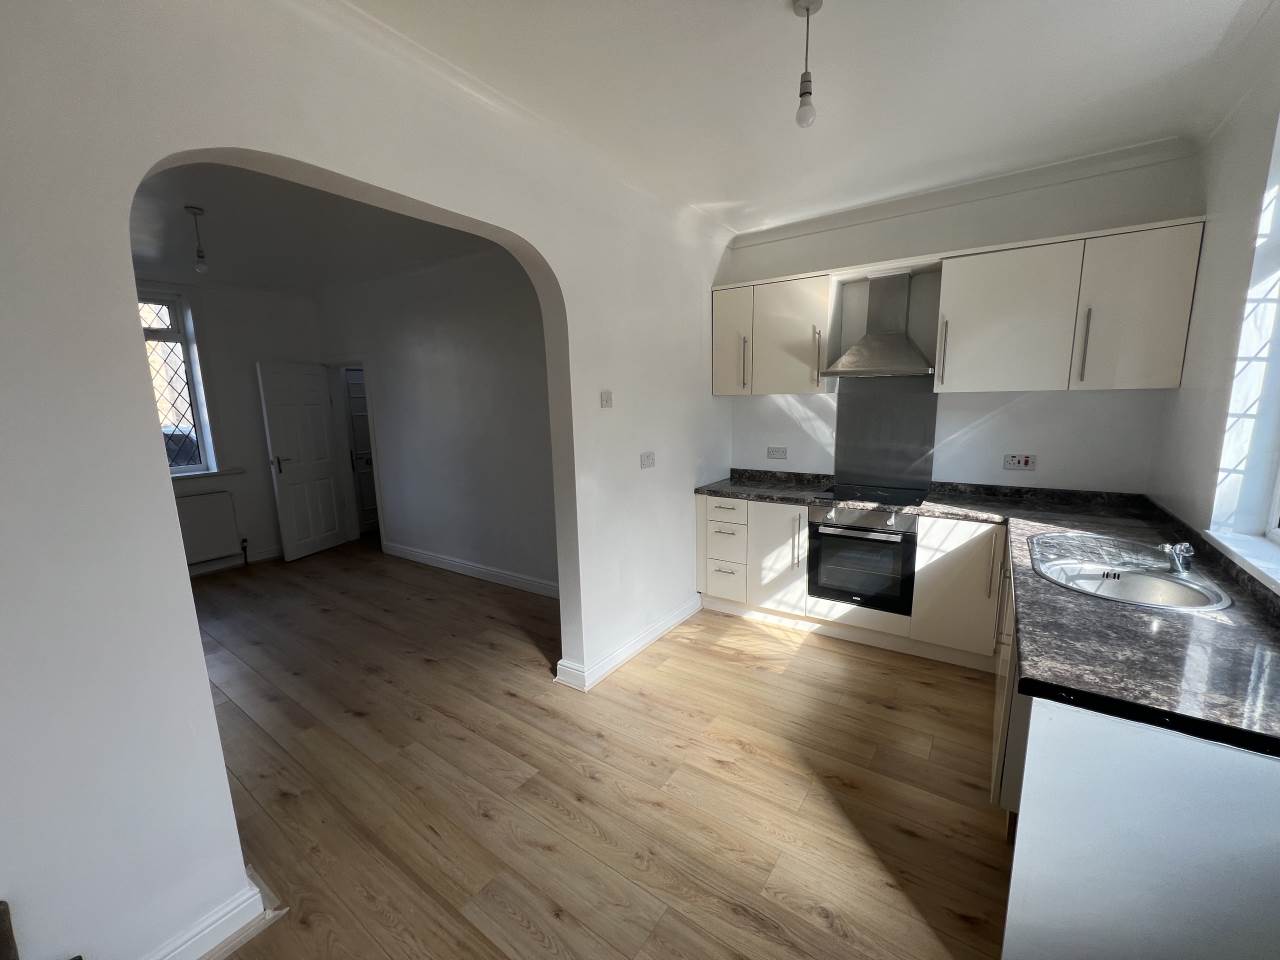 3 bed House (unspecified) for rent in Barnsley. From C and I Lettings - Barnsley